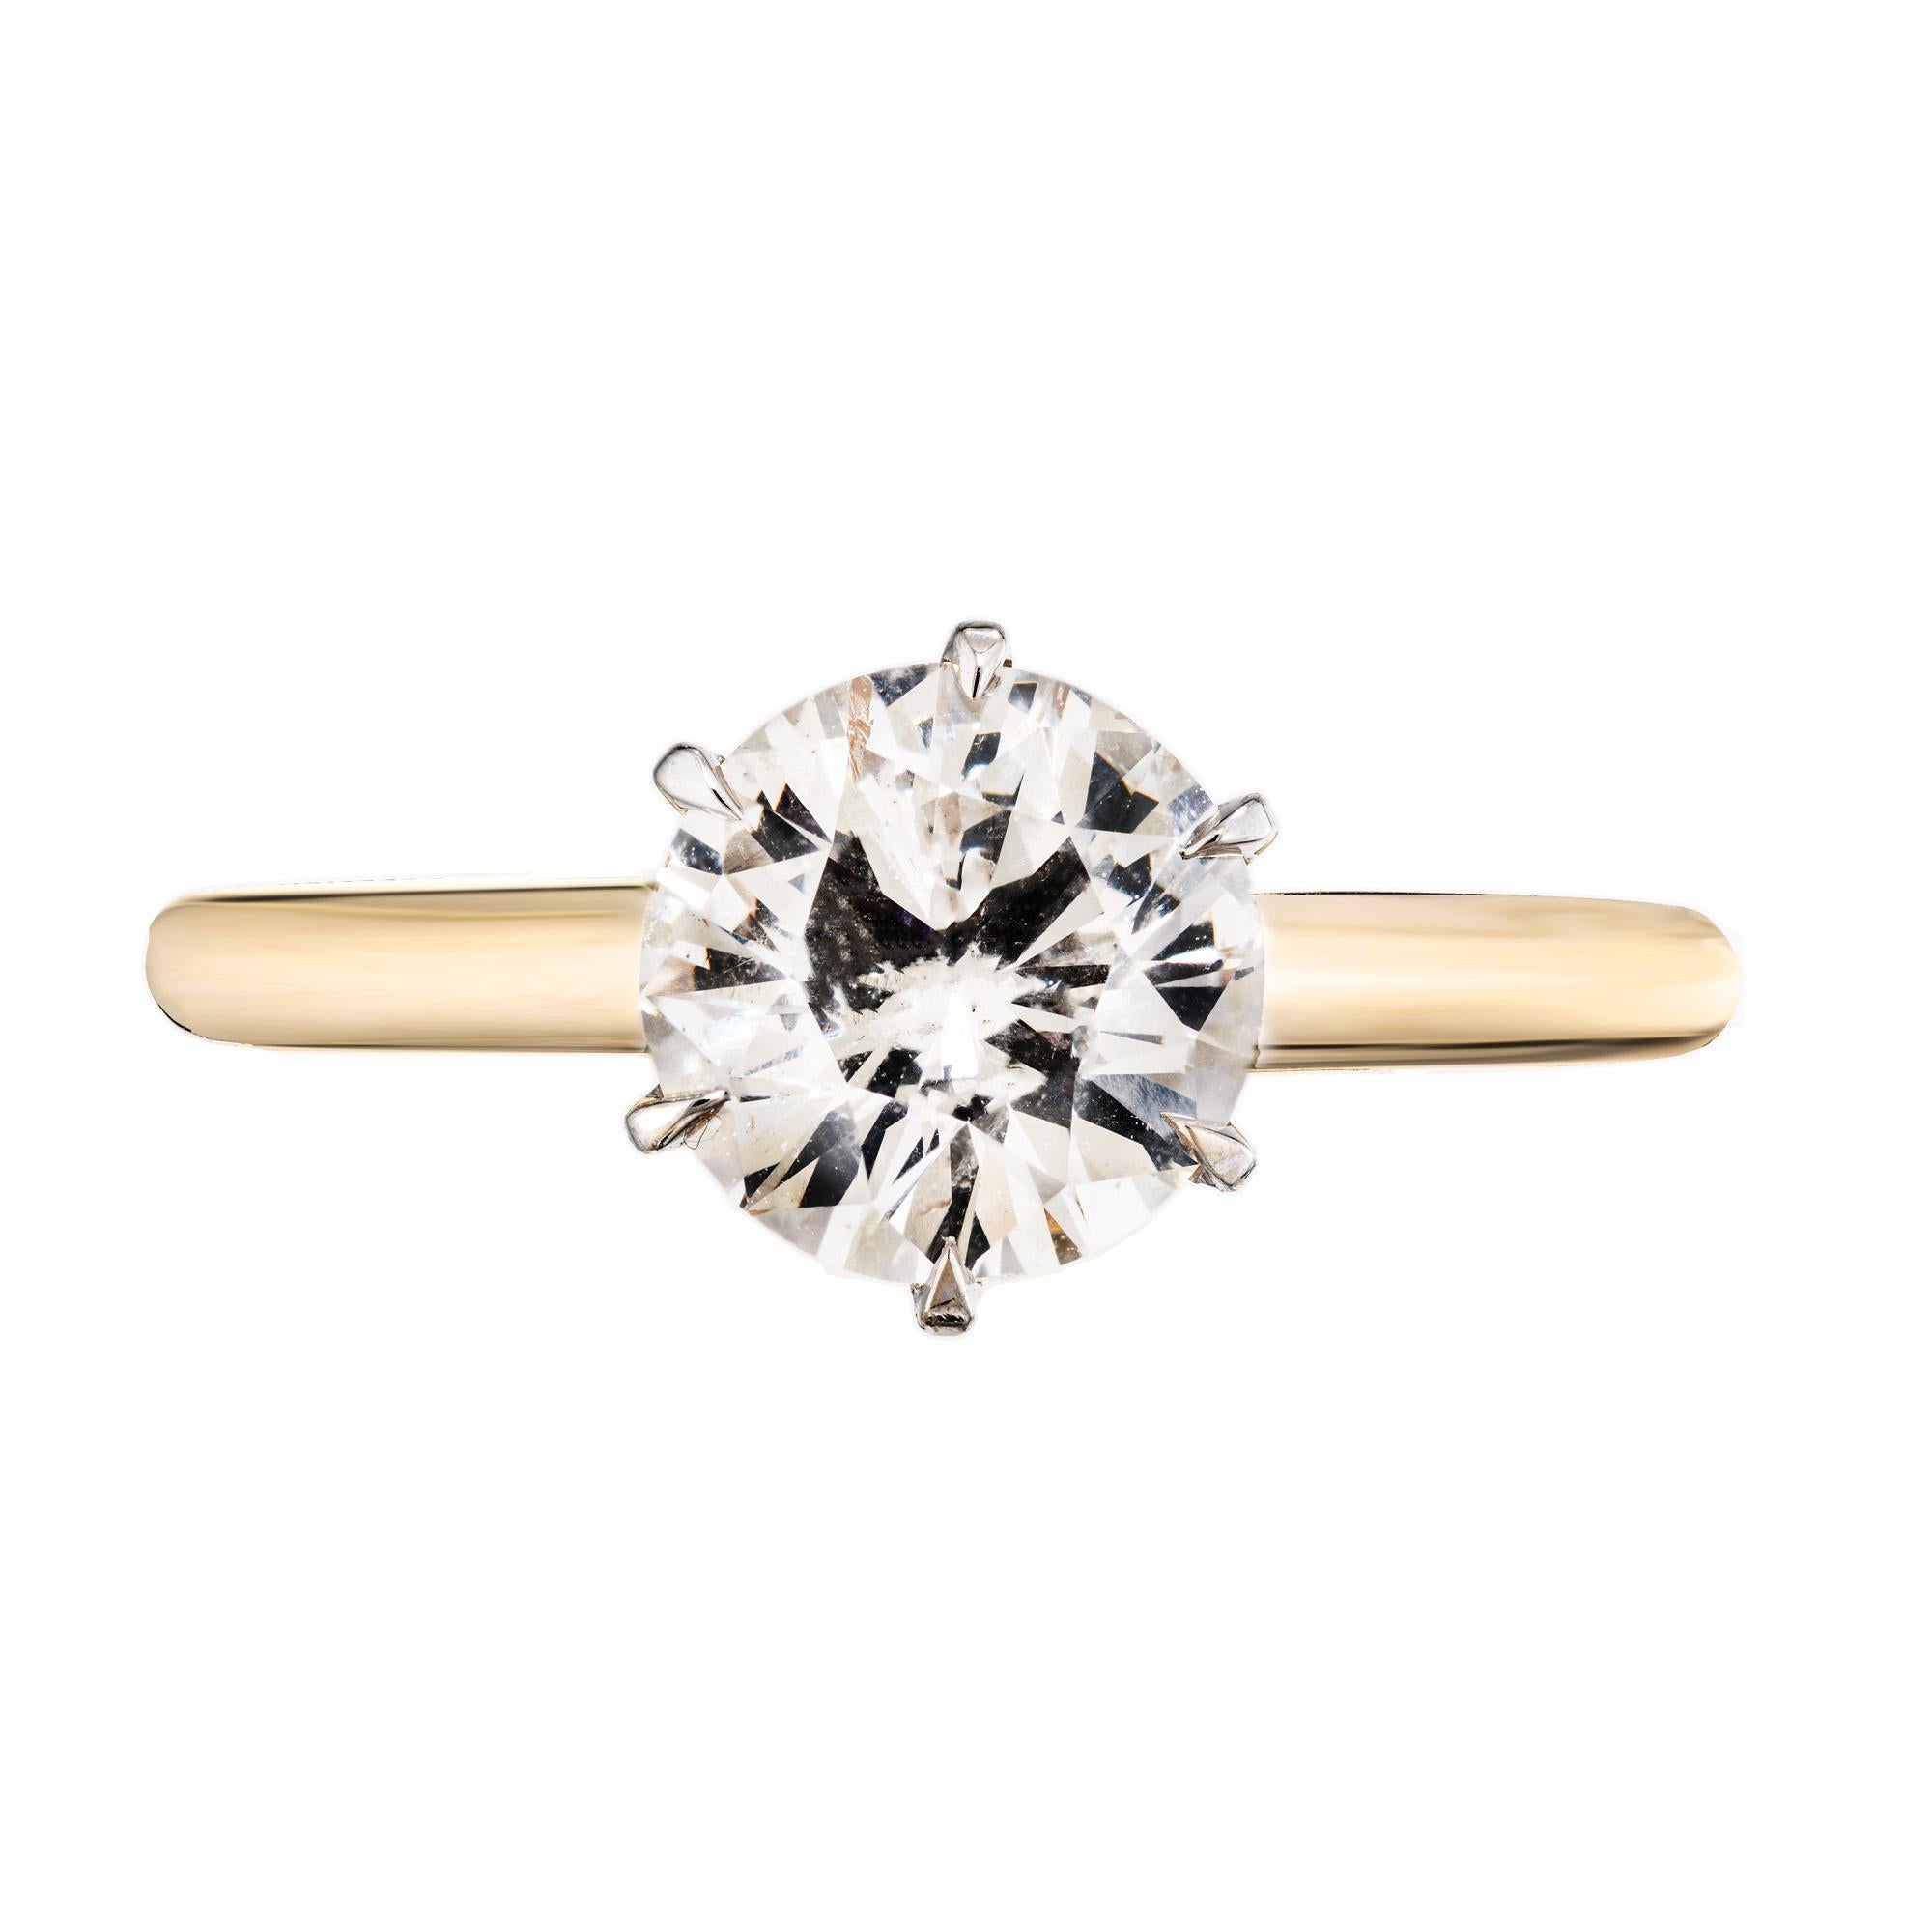 Classic six prong diamond engagement ring. GIA certified 1.5ct round brilliant cut diamond mounted in a two tone 14k yellow and white gold solitaire setting. The stone has been meticulously graded and certified by the GIA as L, faint yellow and I1,